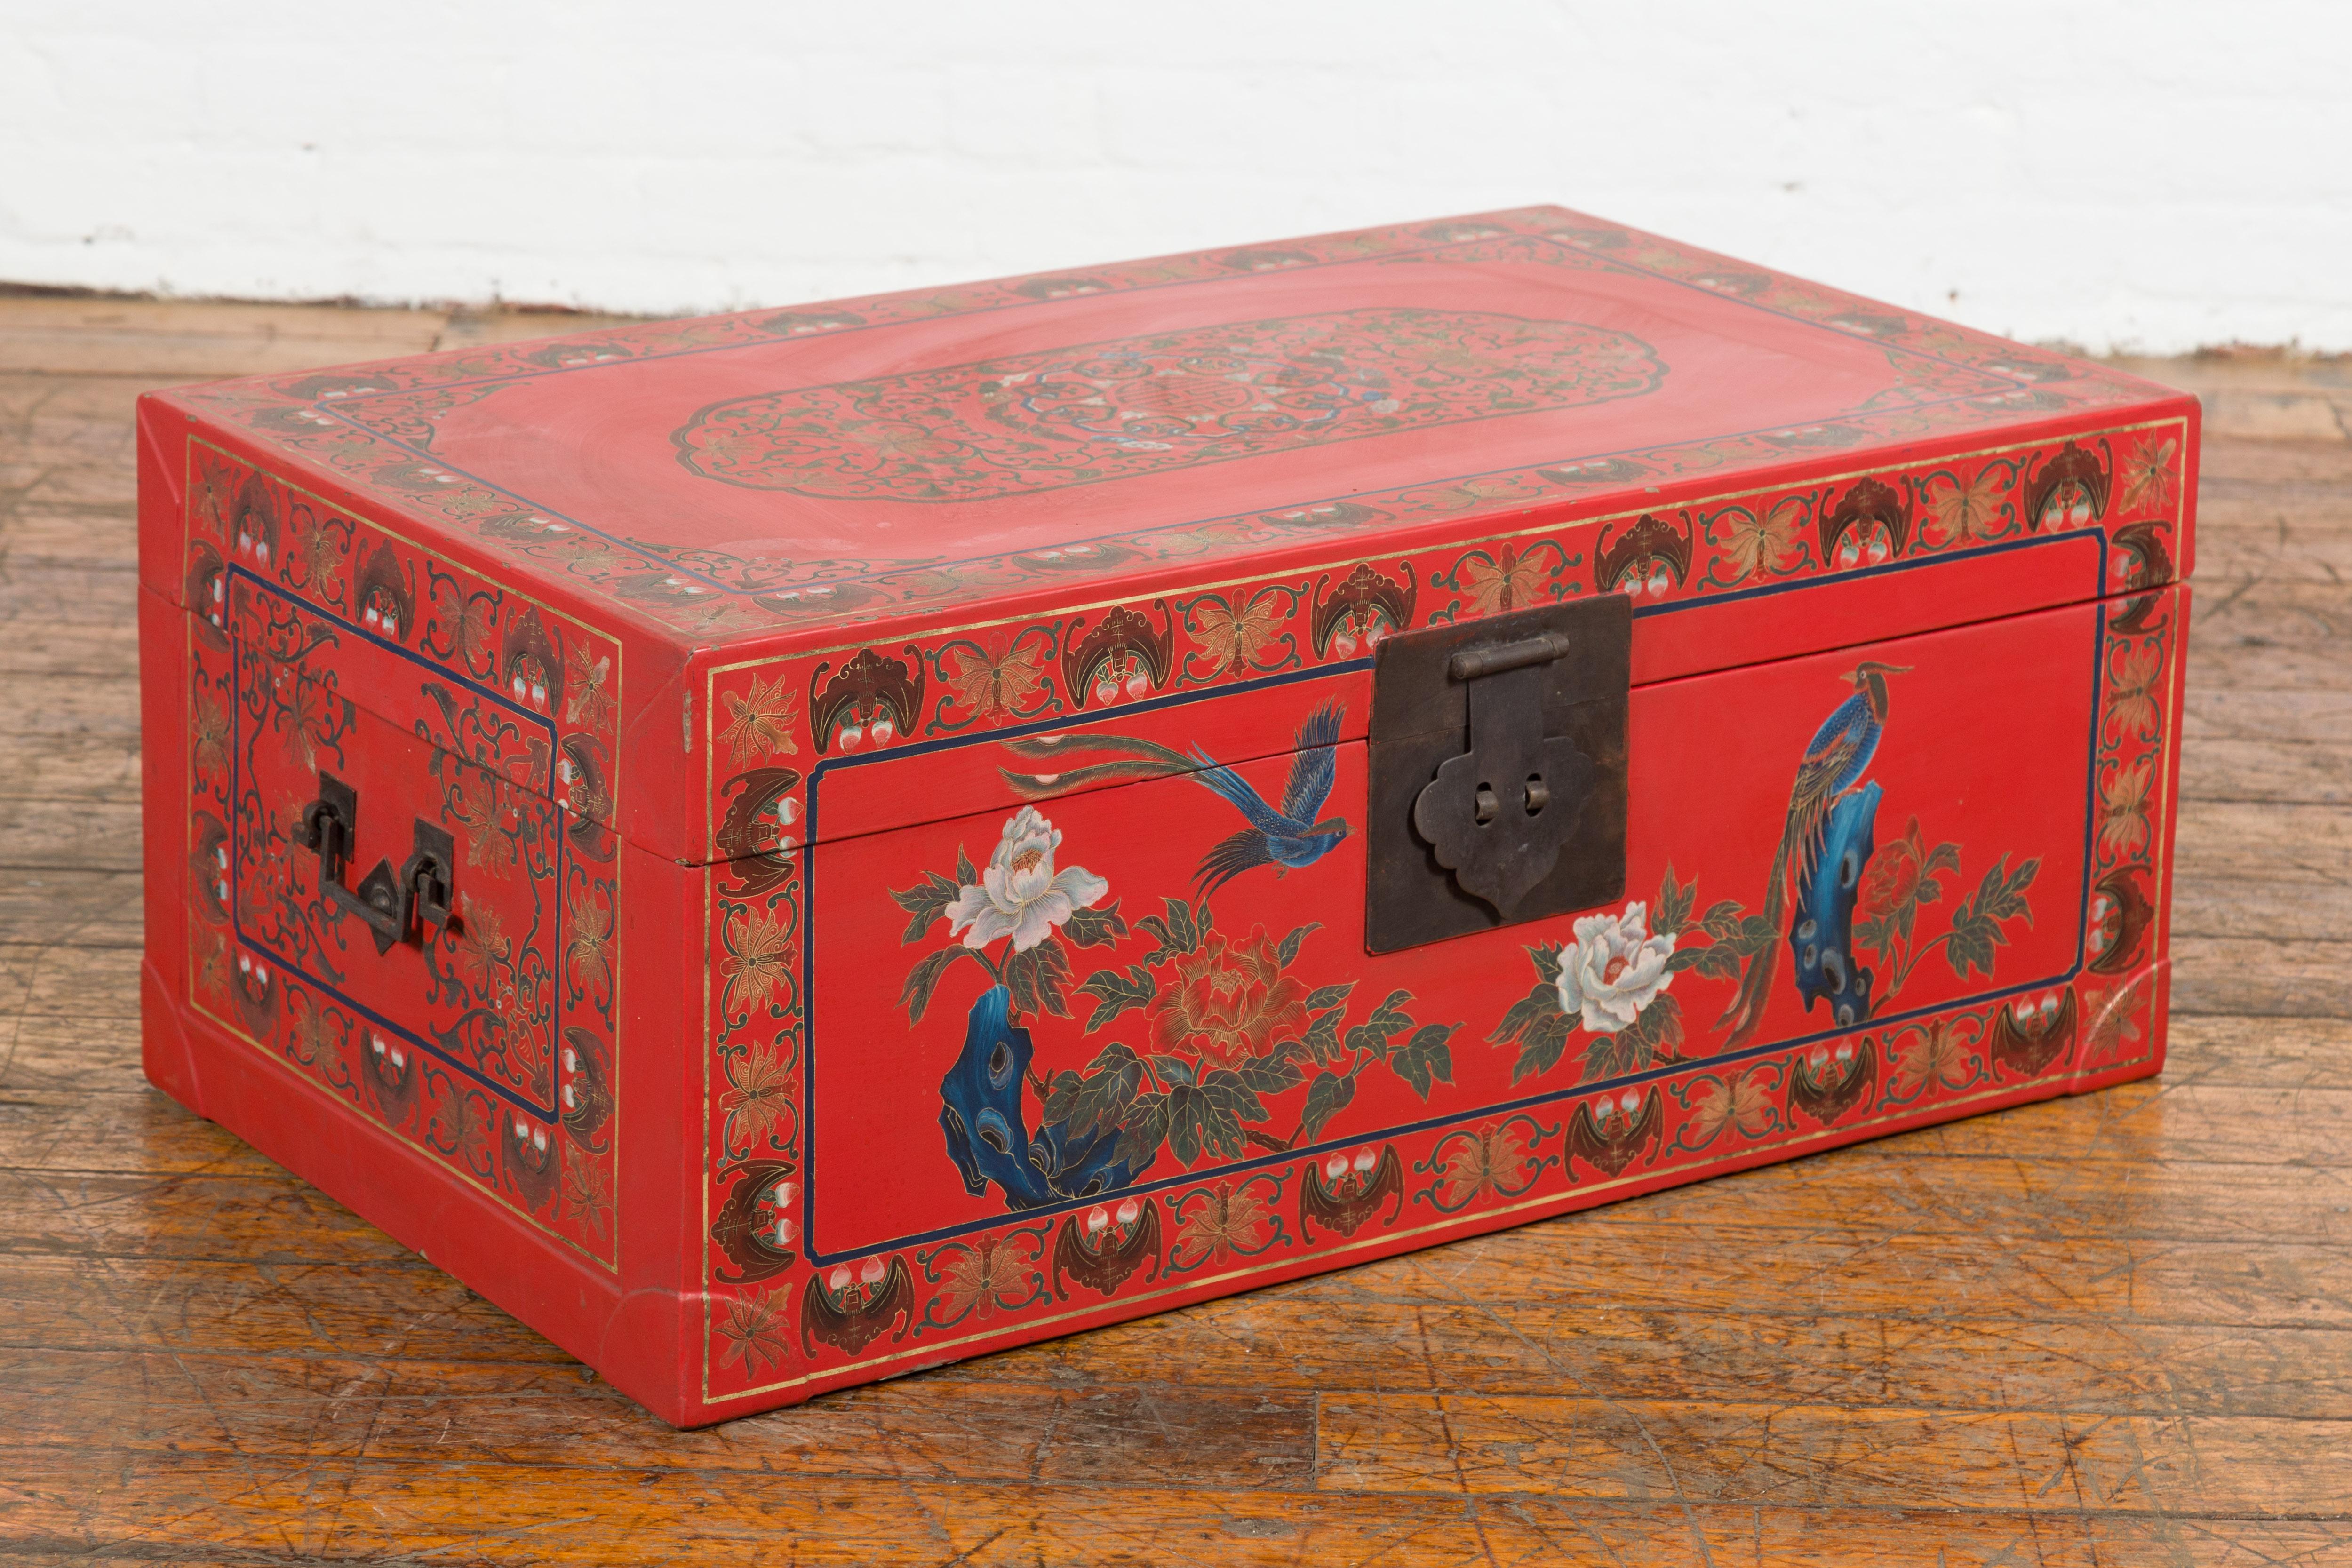 A vintage Chinese red lacquer blanket chest from the Mid-20th Century with egret bird motifs and friezes of bats and flowers around all the edges. Immerse yourself in the artful allure of this vintage Chinese red lacquer blanket chest from the mid